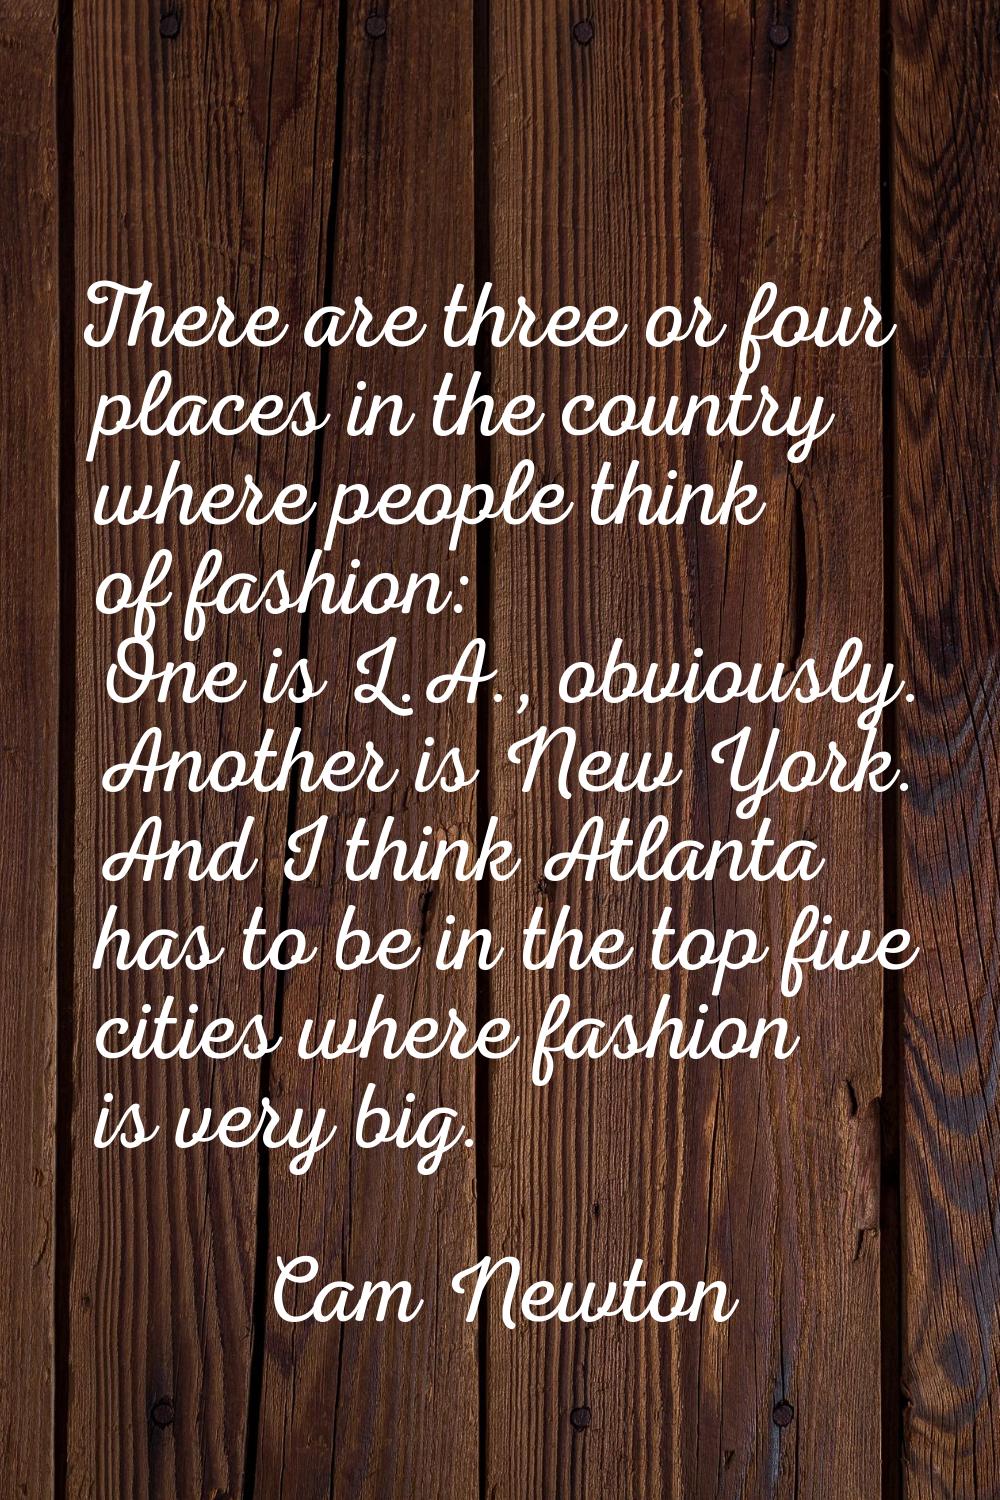 There are three or four places in the country where people think of fashion: One is L.A., obviously